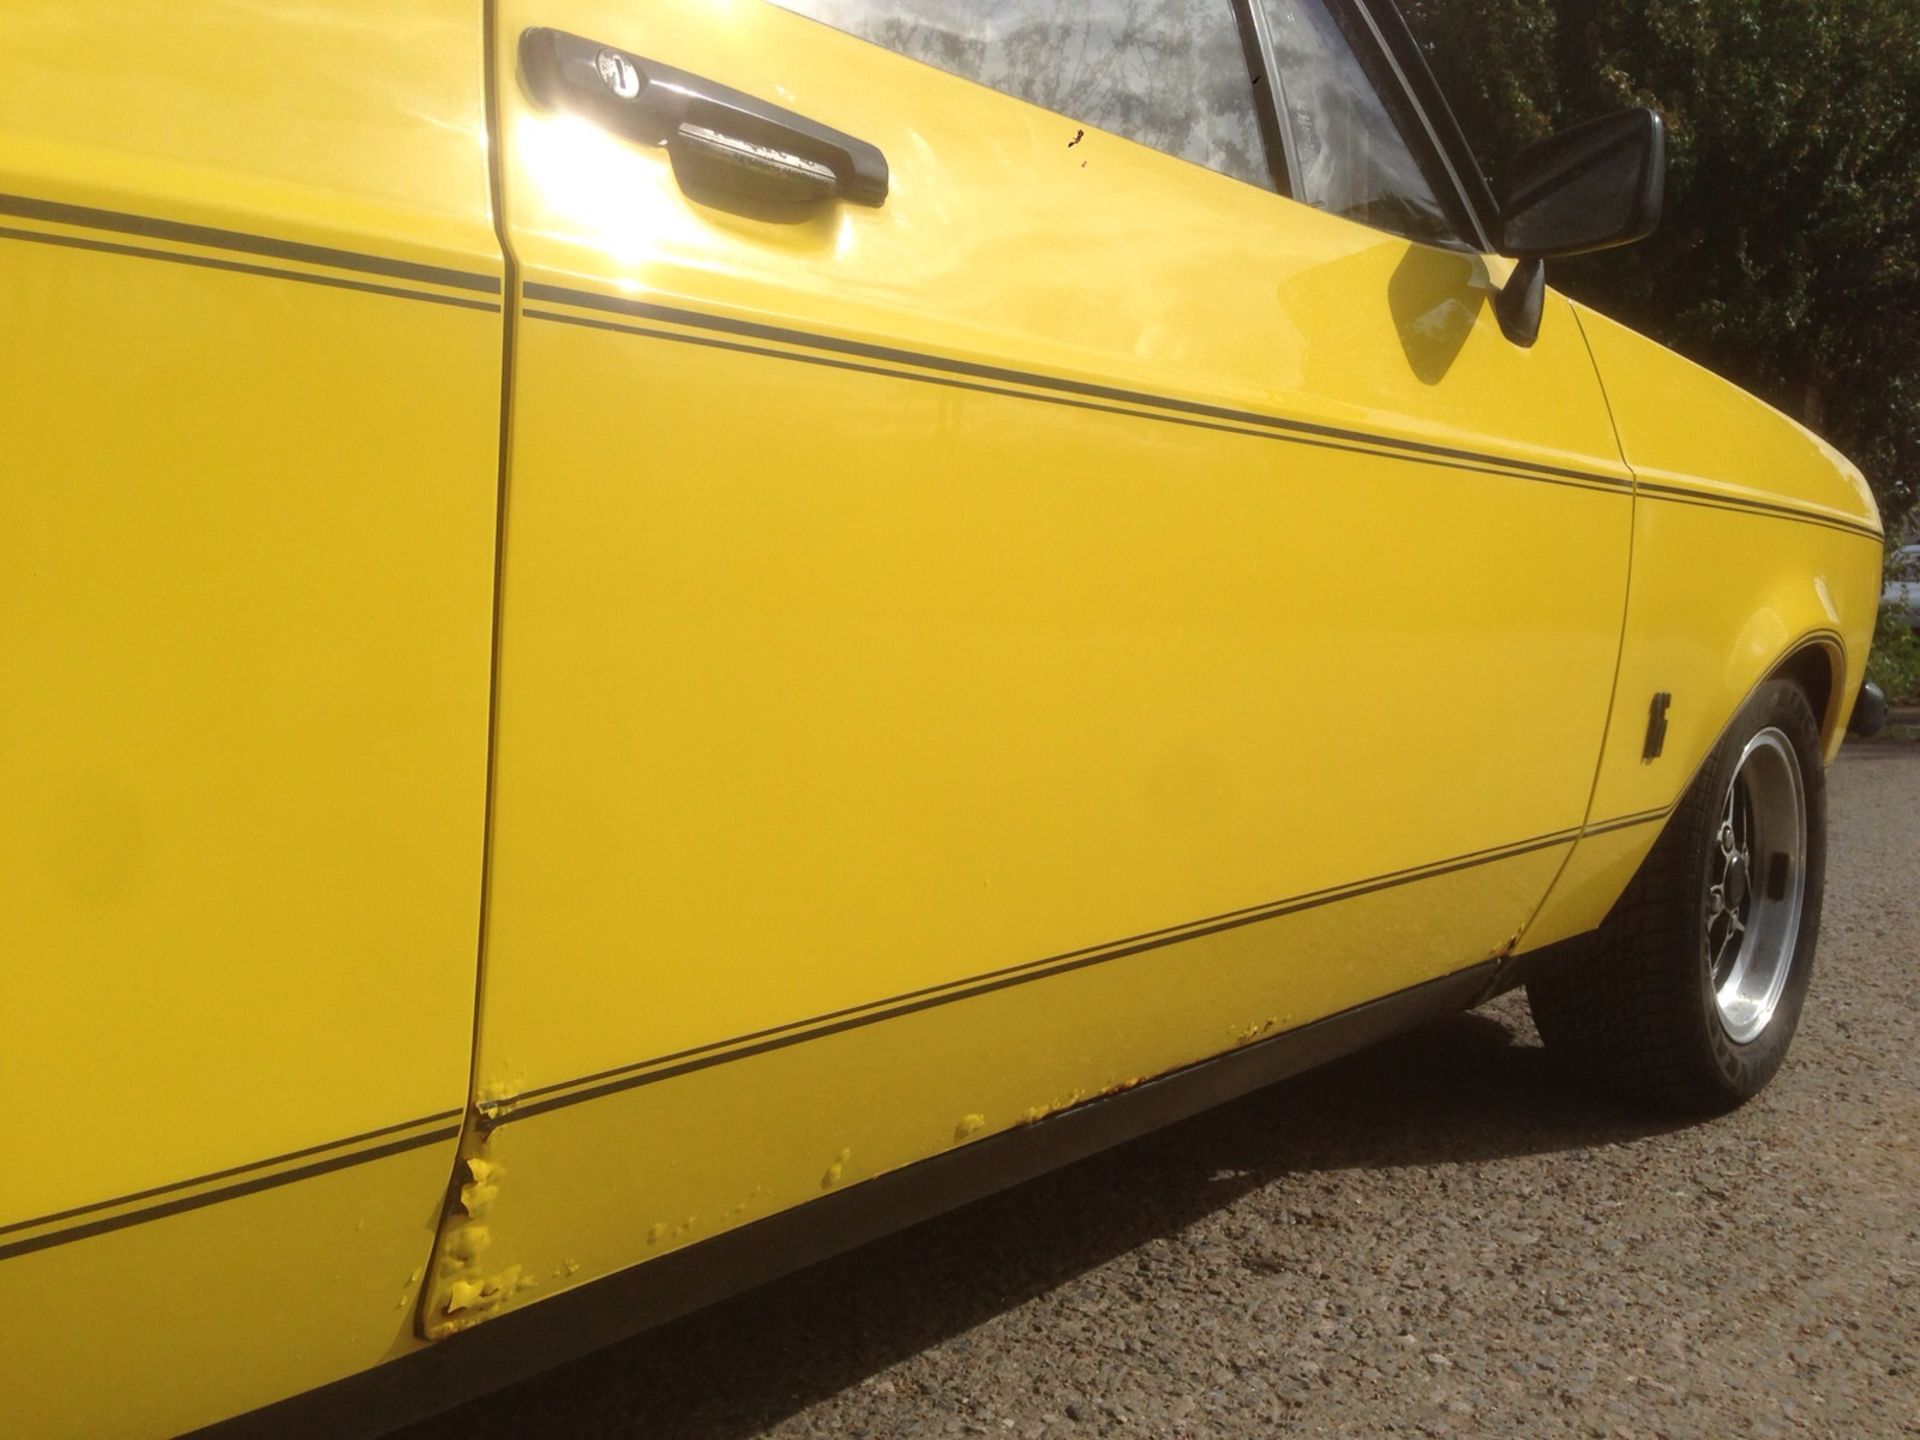 1979/T Ford Escort mk2 1600 Sport - in Signal yellow -  UK car  (545 miles) since rebuild - Image 22 of 54